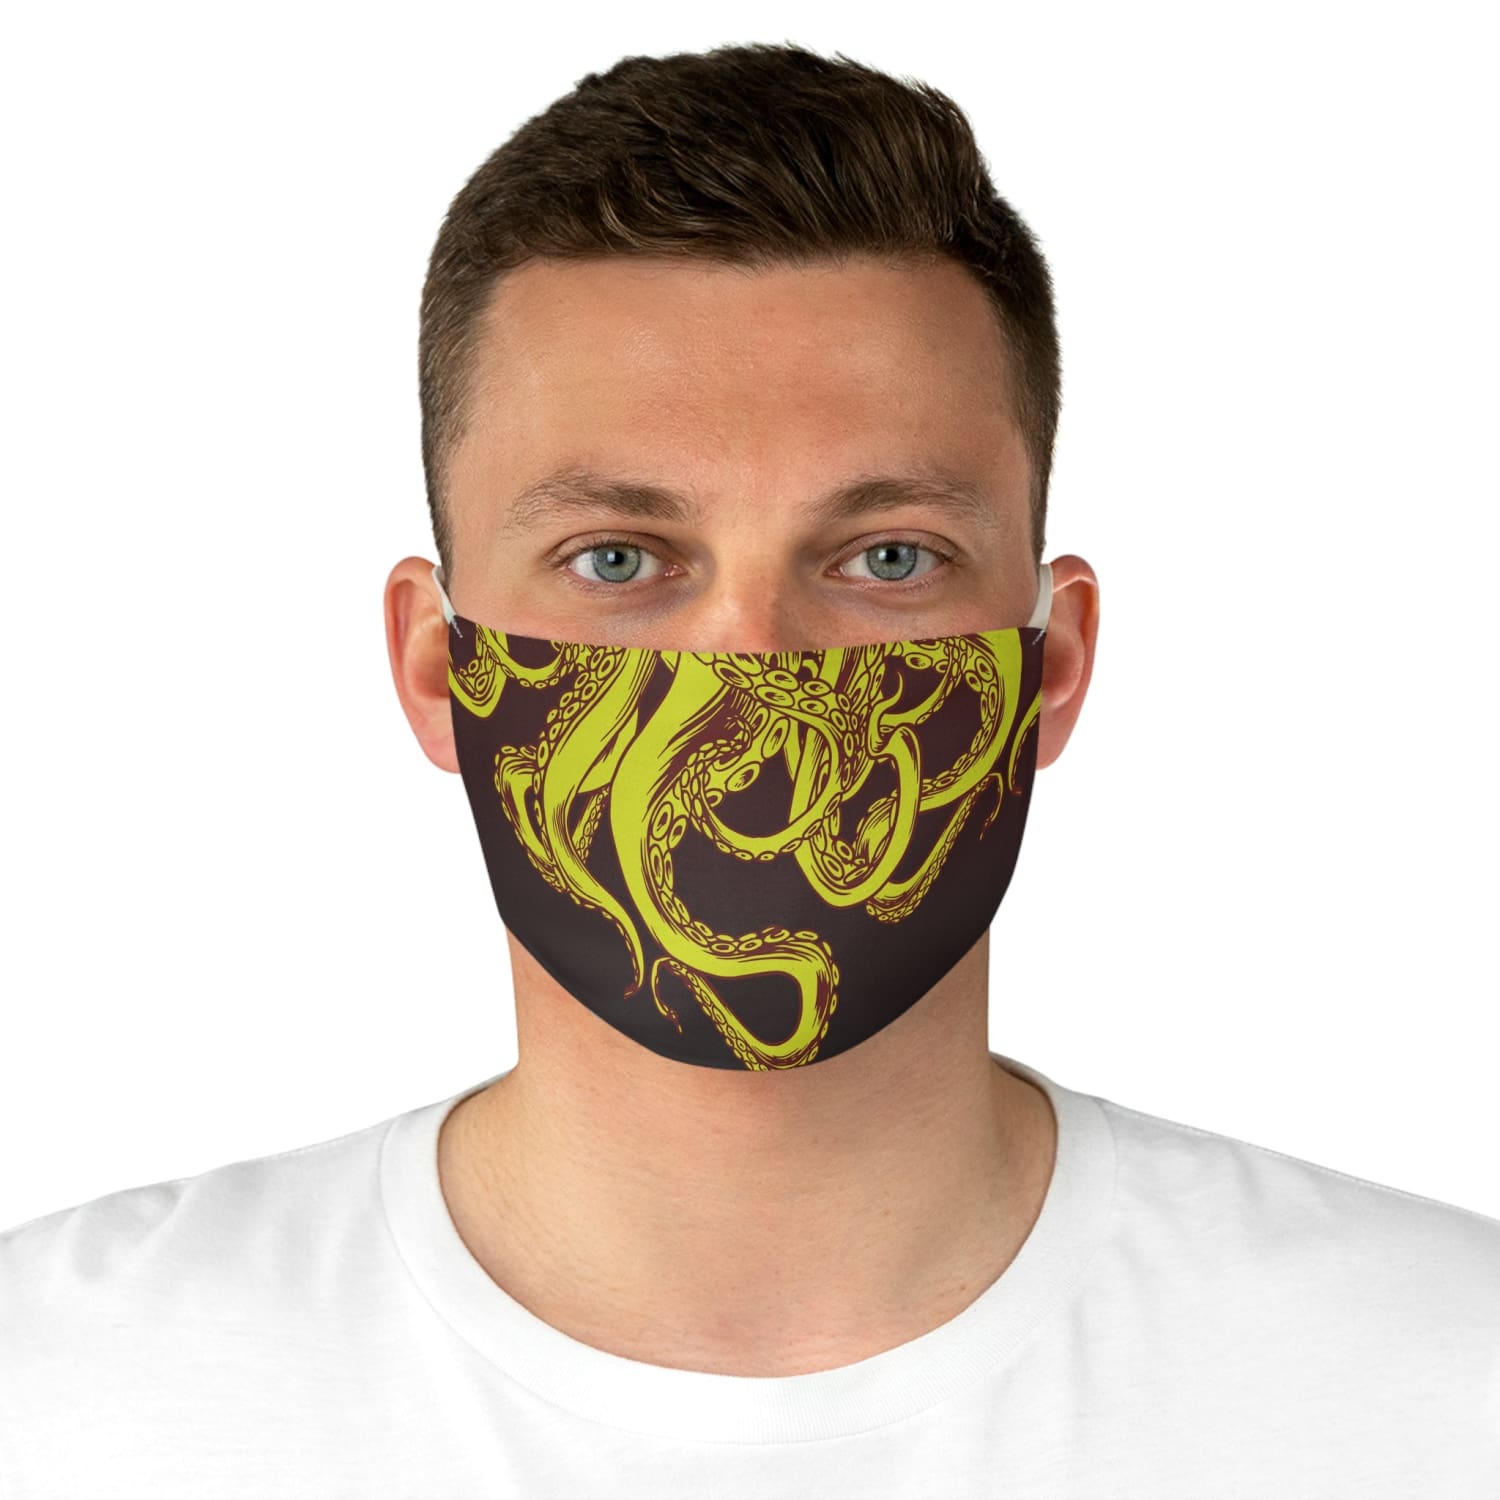 Cthulhu Red Fabric Face Mask - One size - Accessories